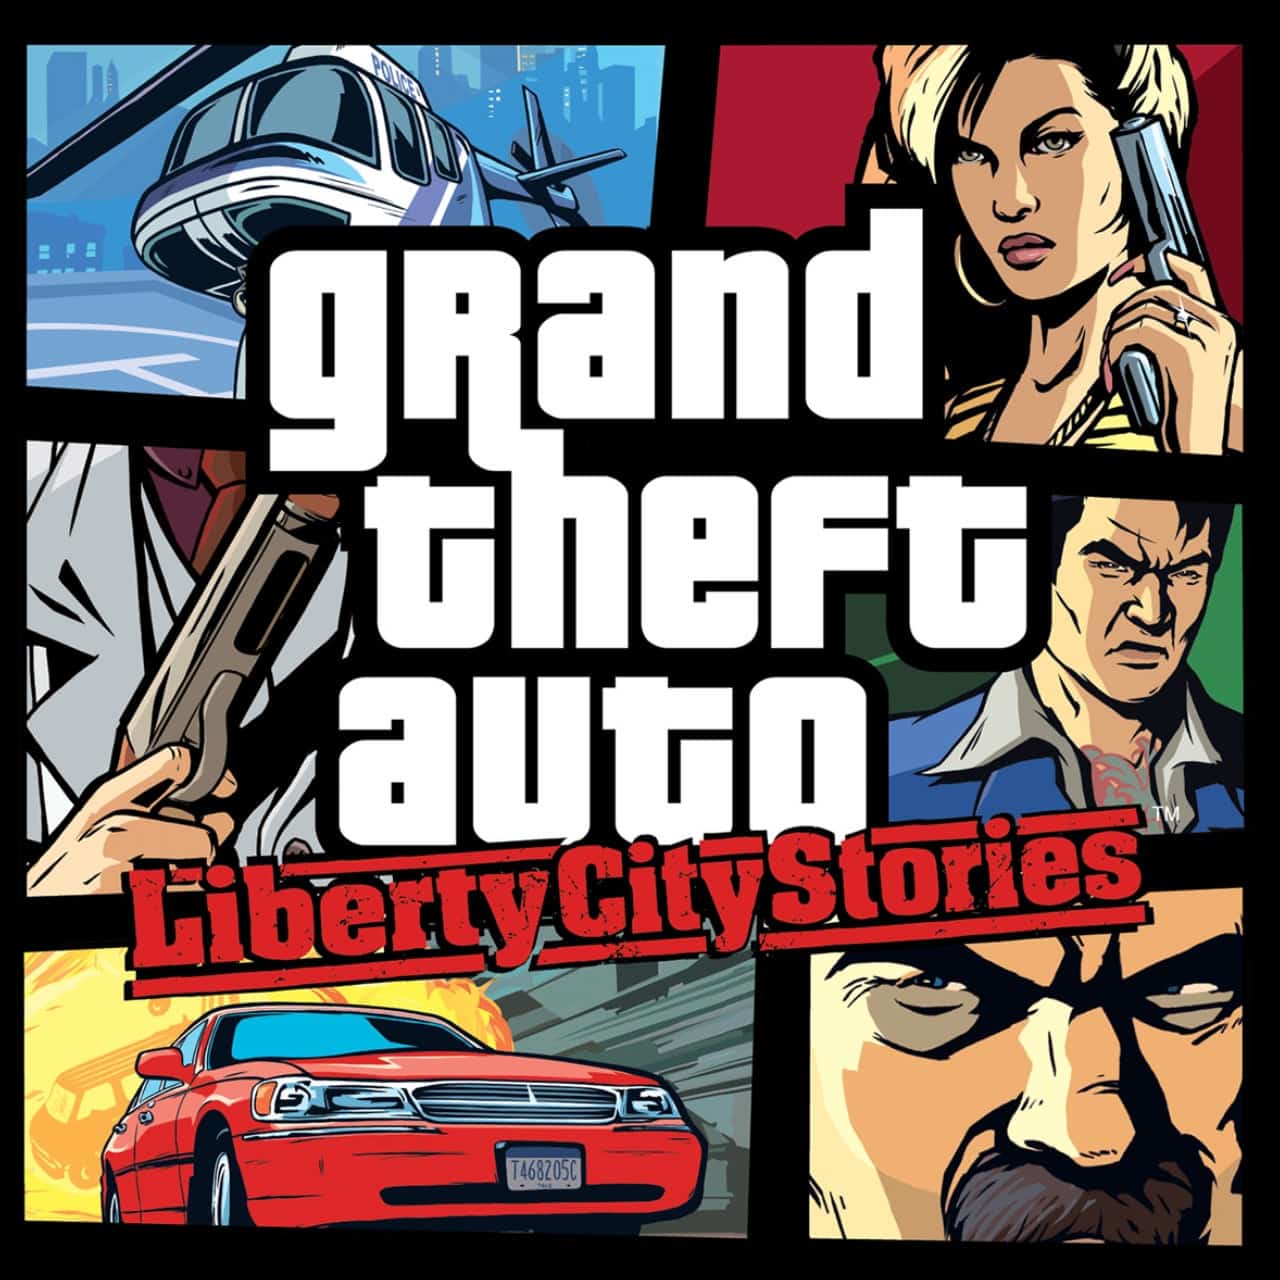 Grand Theft Auto: Liberty City Stories review